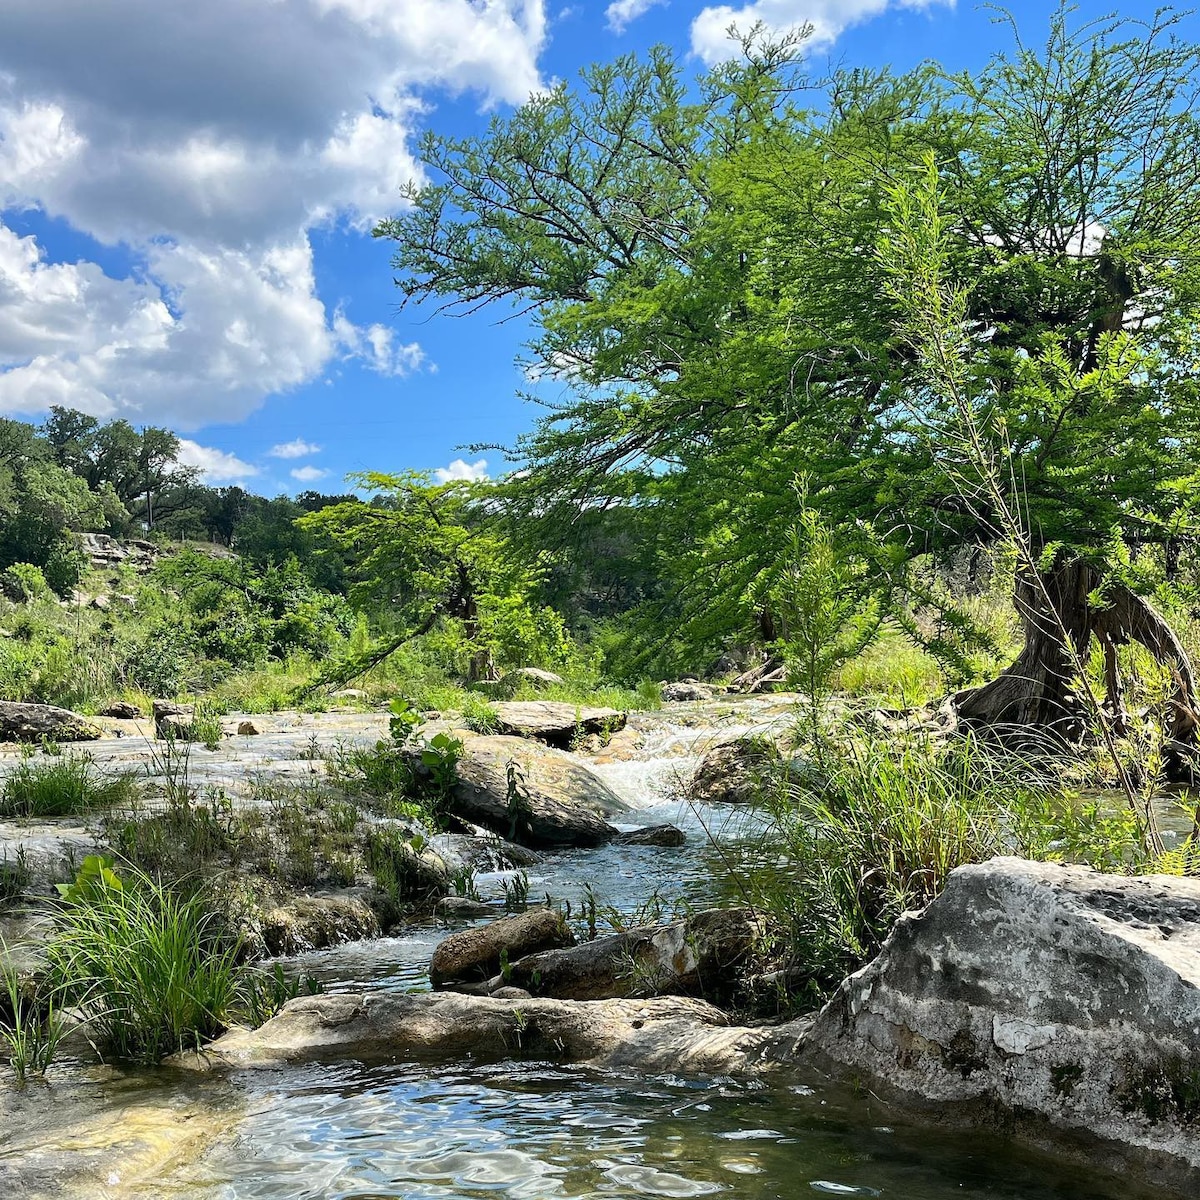 Take the Plunge in Wimberley